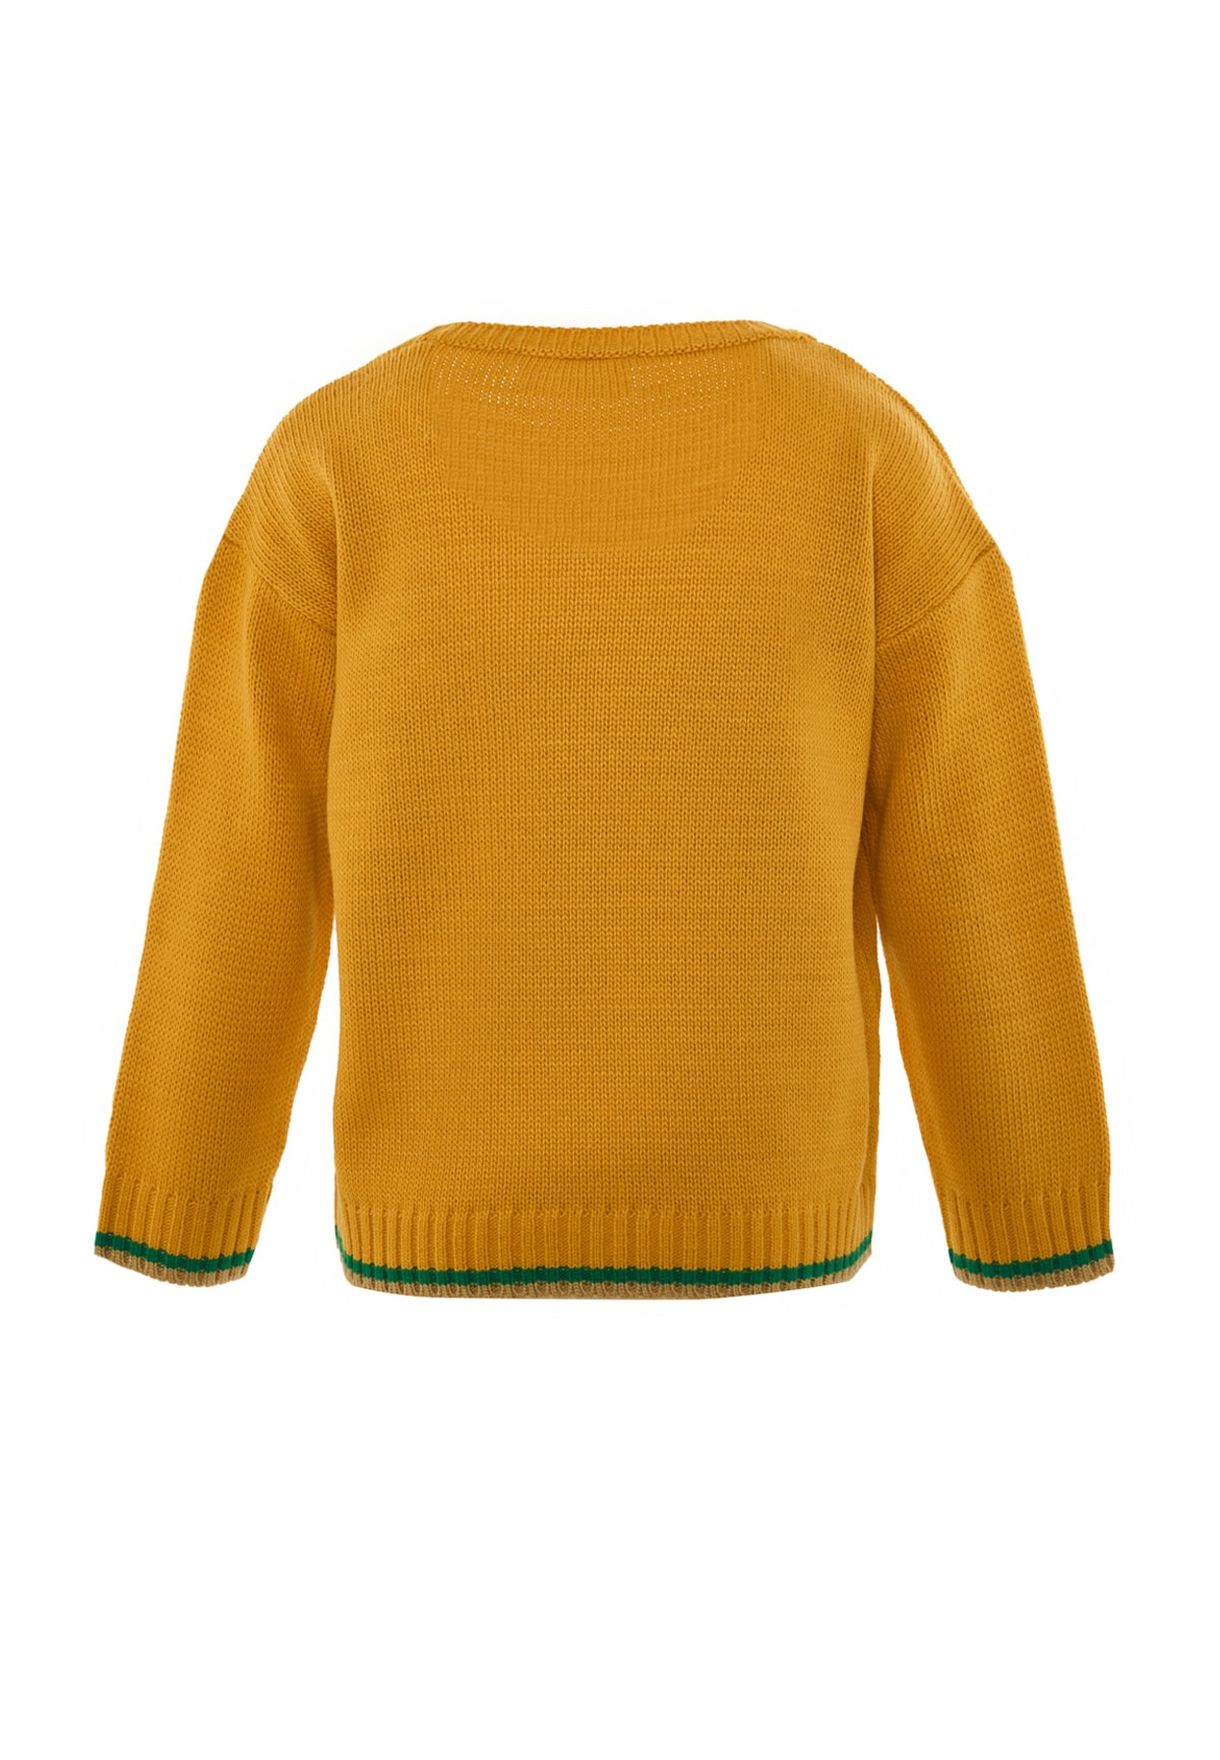 Kids Embroidered Car Knitted Sweater